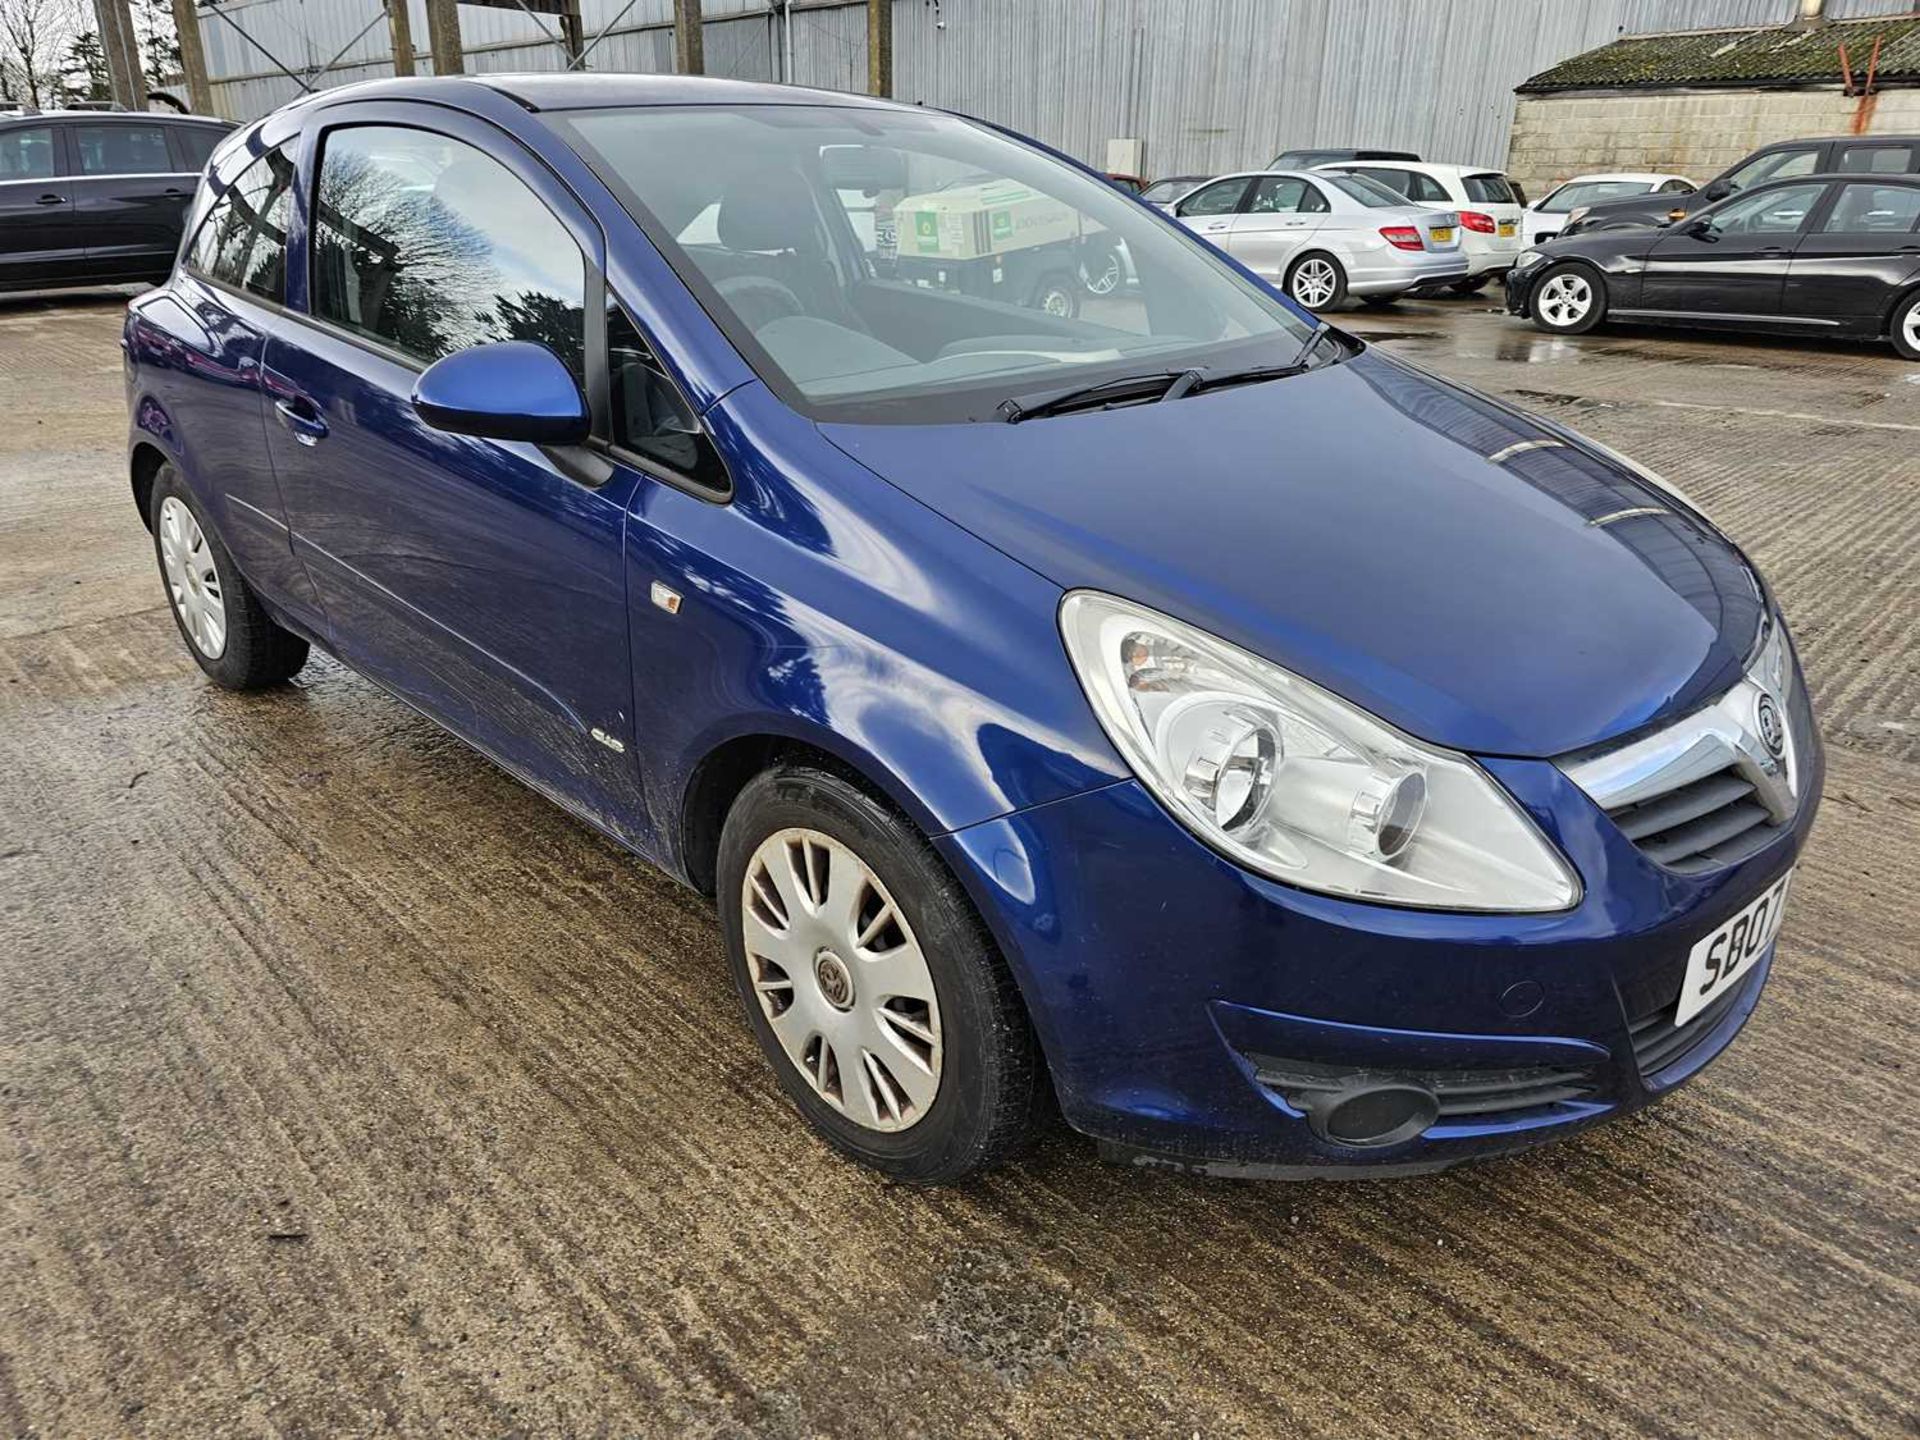 2007 Vauxhall Corsa 1.4, 5 Speed, A/C (Reg. Docs. Available) - Image 8 of 29